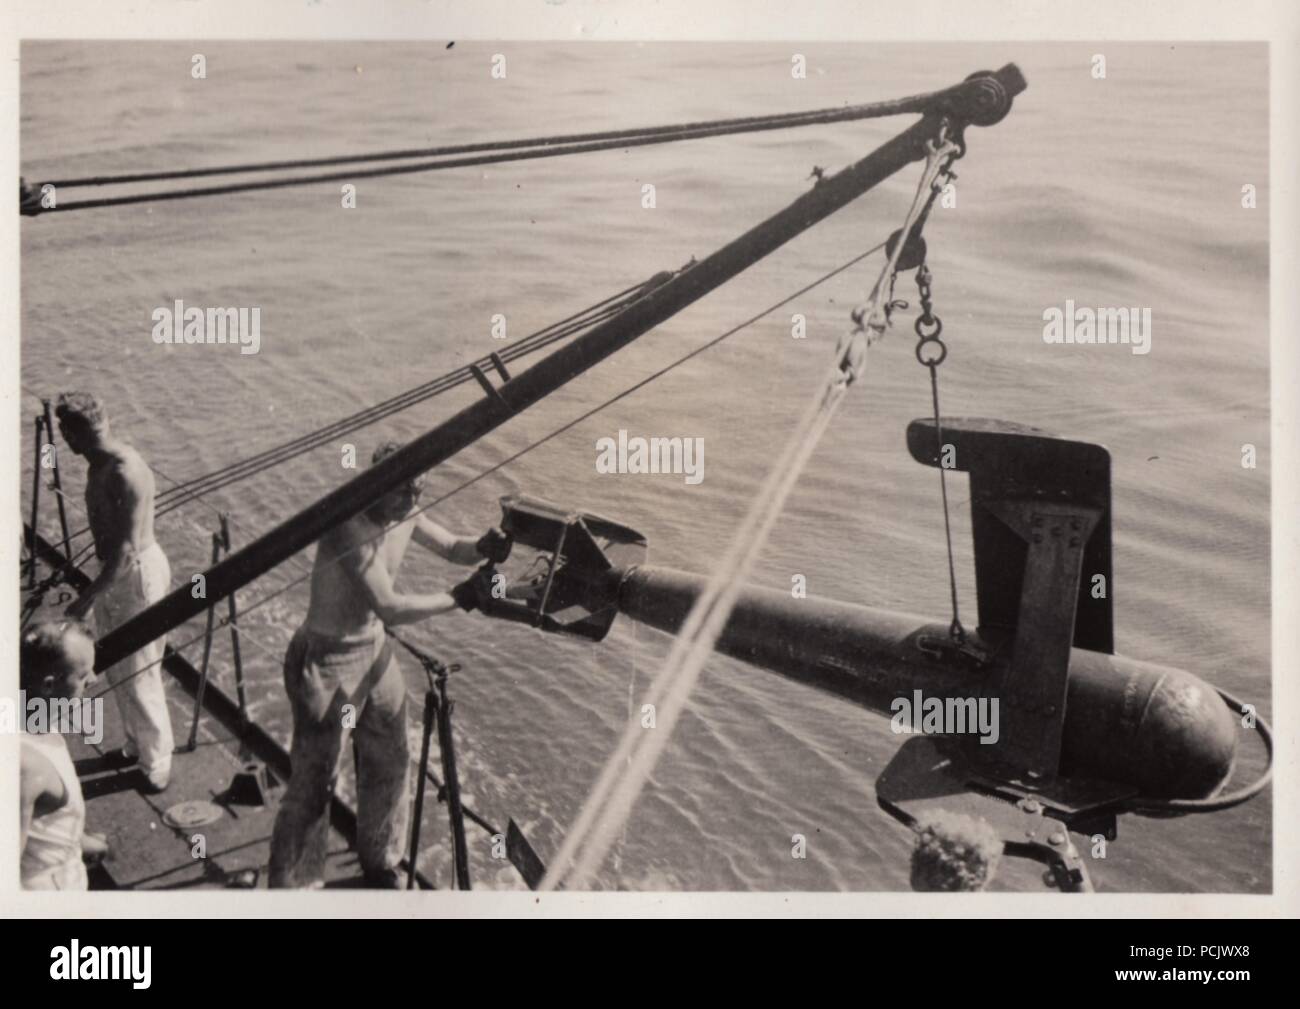 Image from the photo album of Oberfänrich Wilhelm Gaul - Deploying mine clearance equipment from German Torpedoboot Leopard (Torpedo Boat Leopard) in 1937, during the Spanish Civil War. Stock Photo